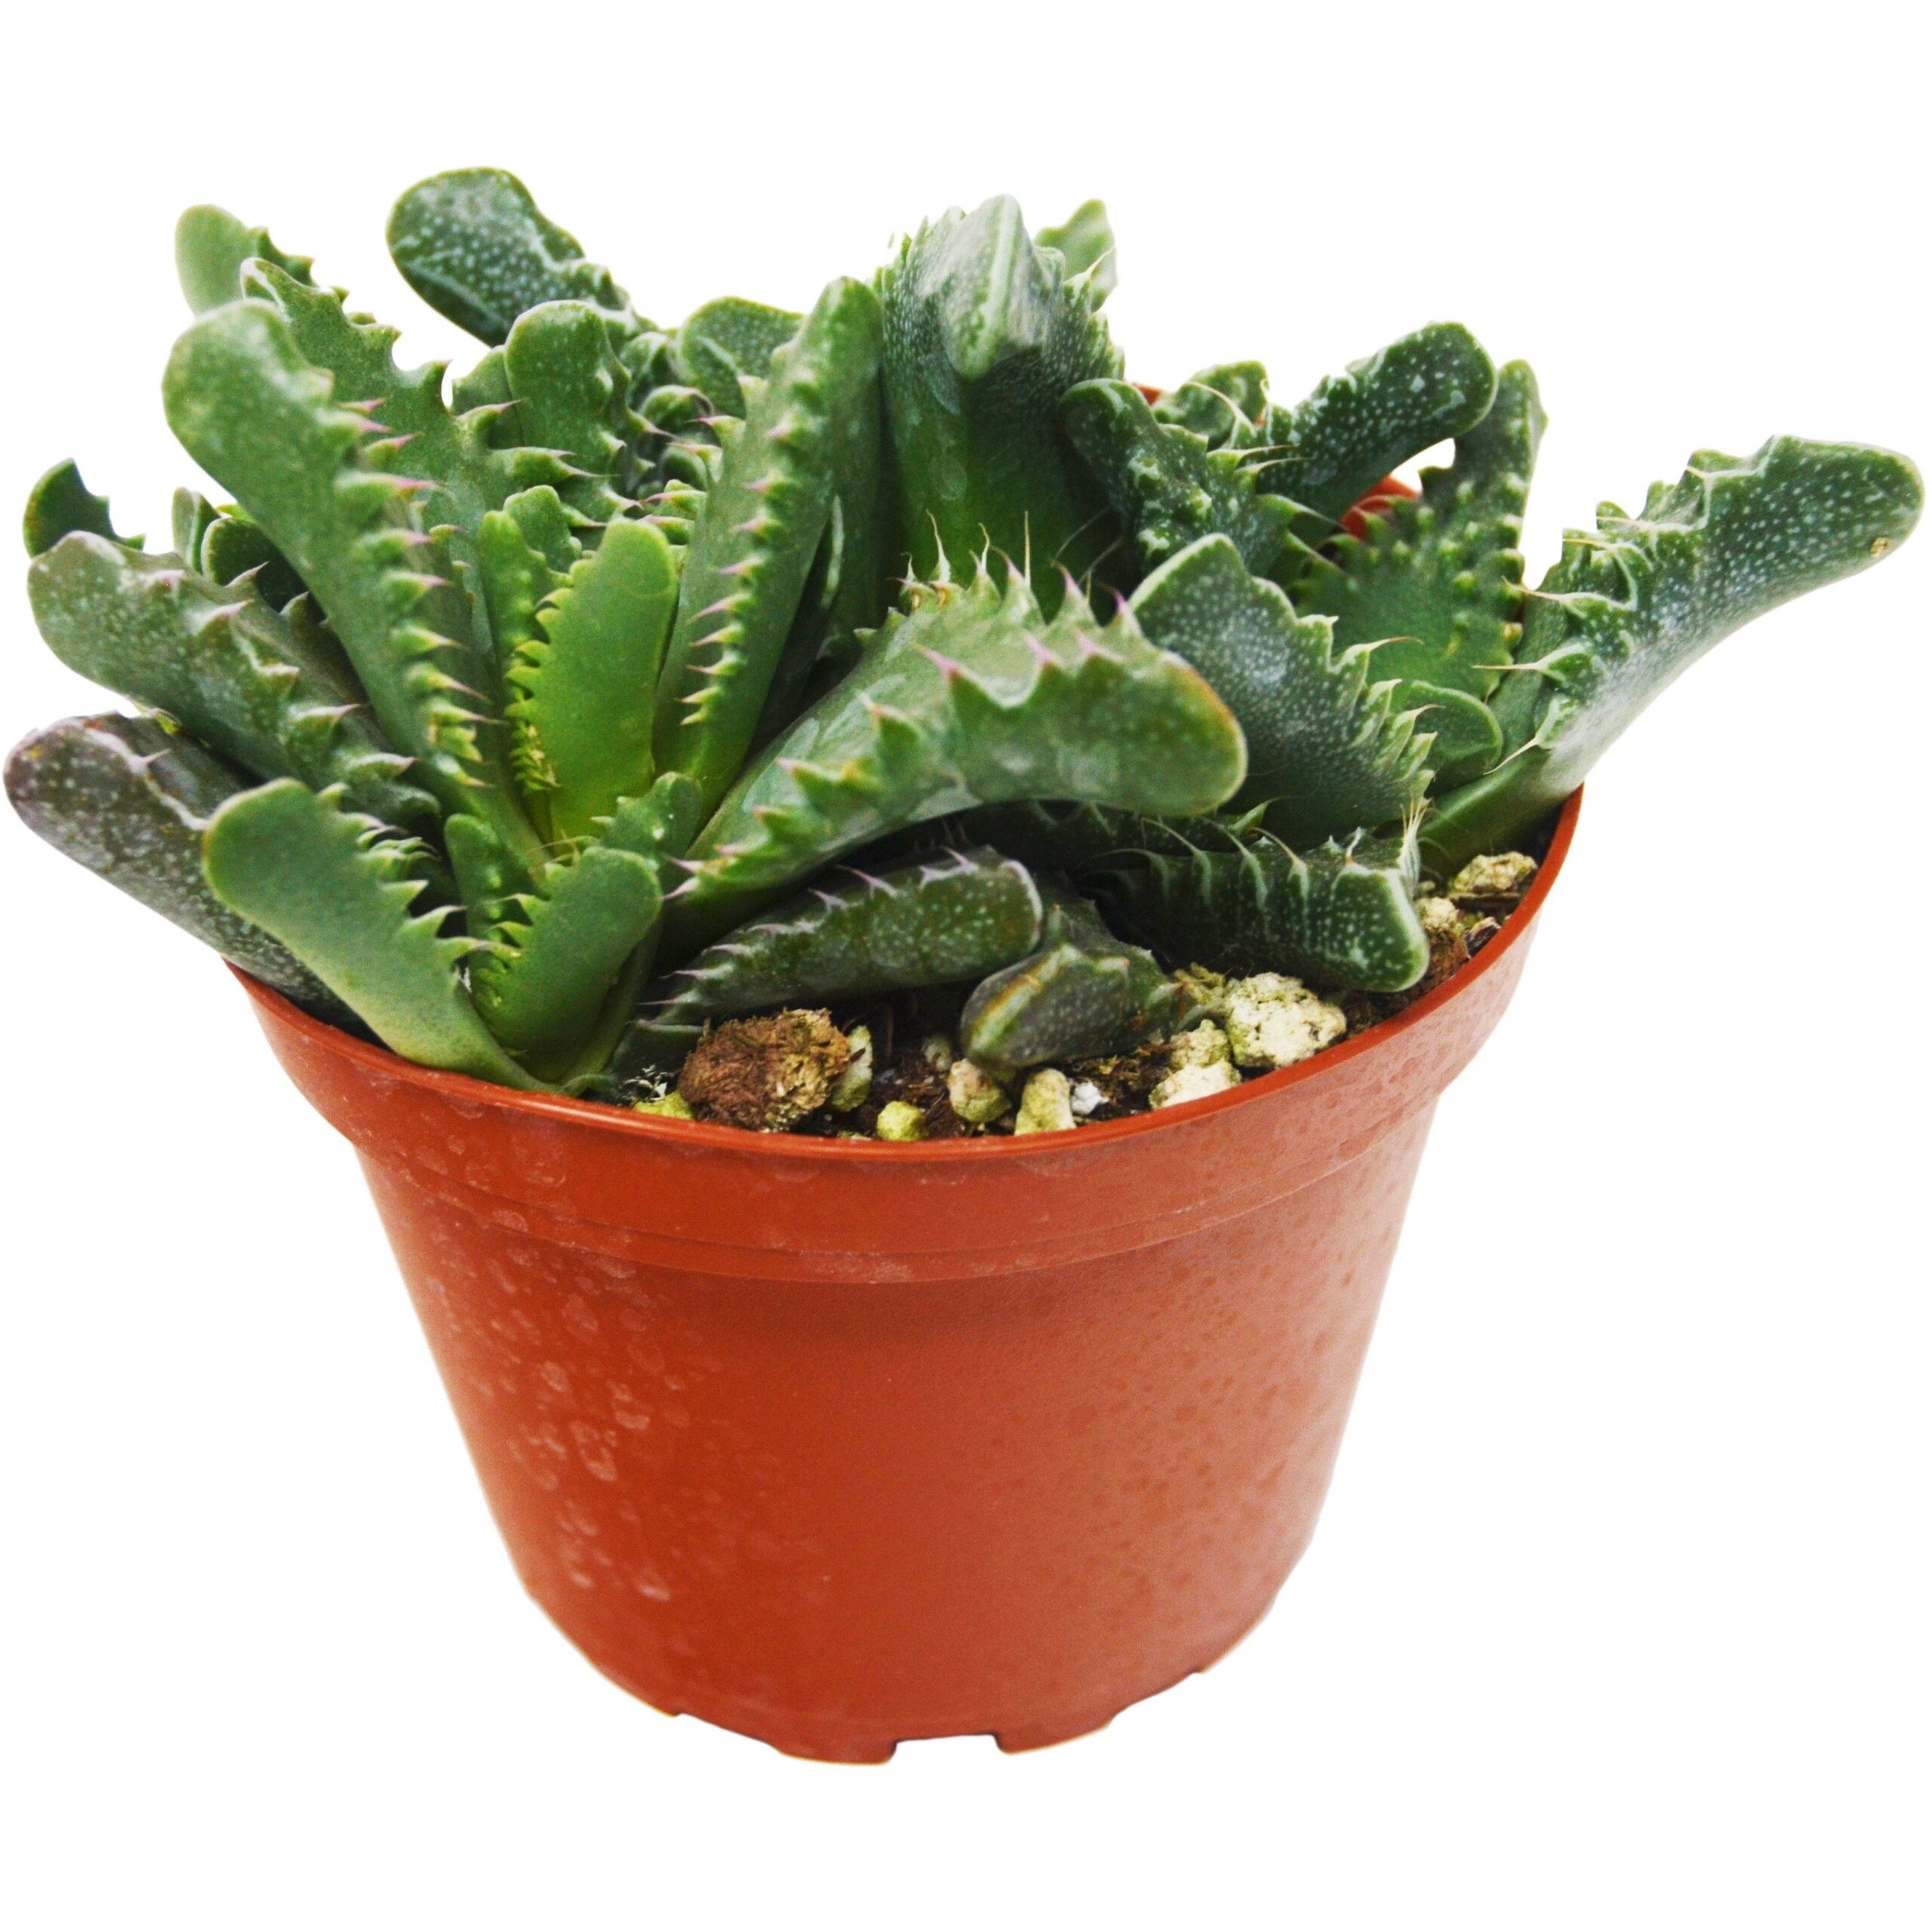 A cactus plant in a pot on a white background, available at the best plant nursery near me.